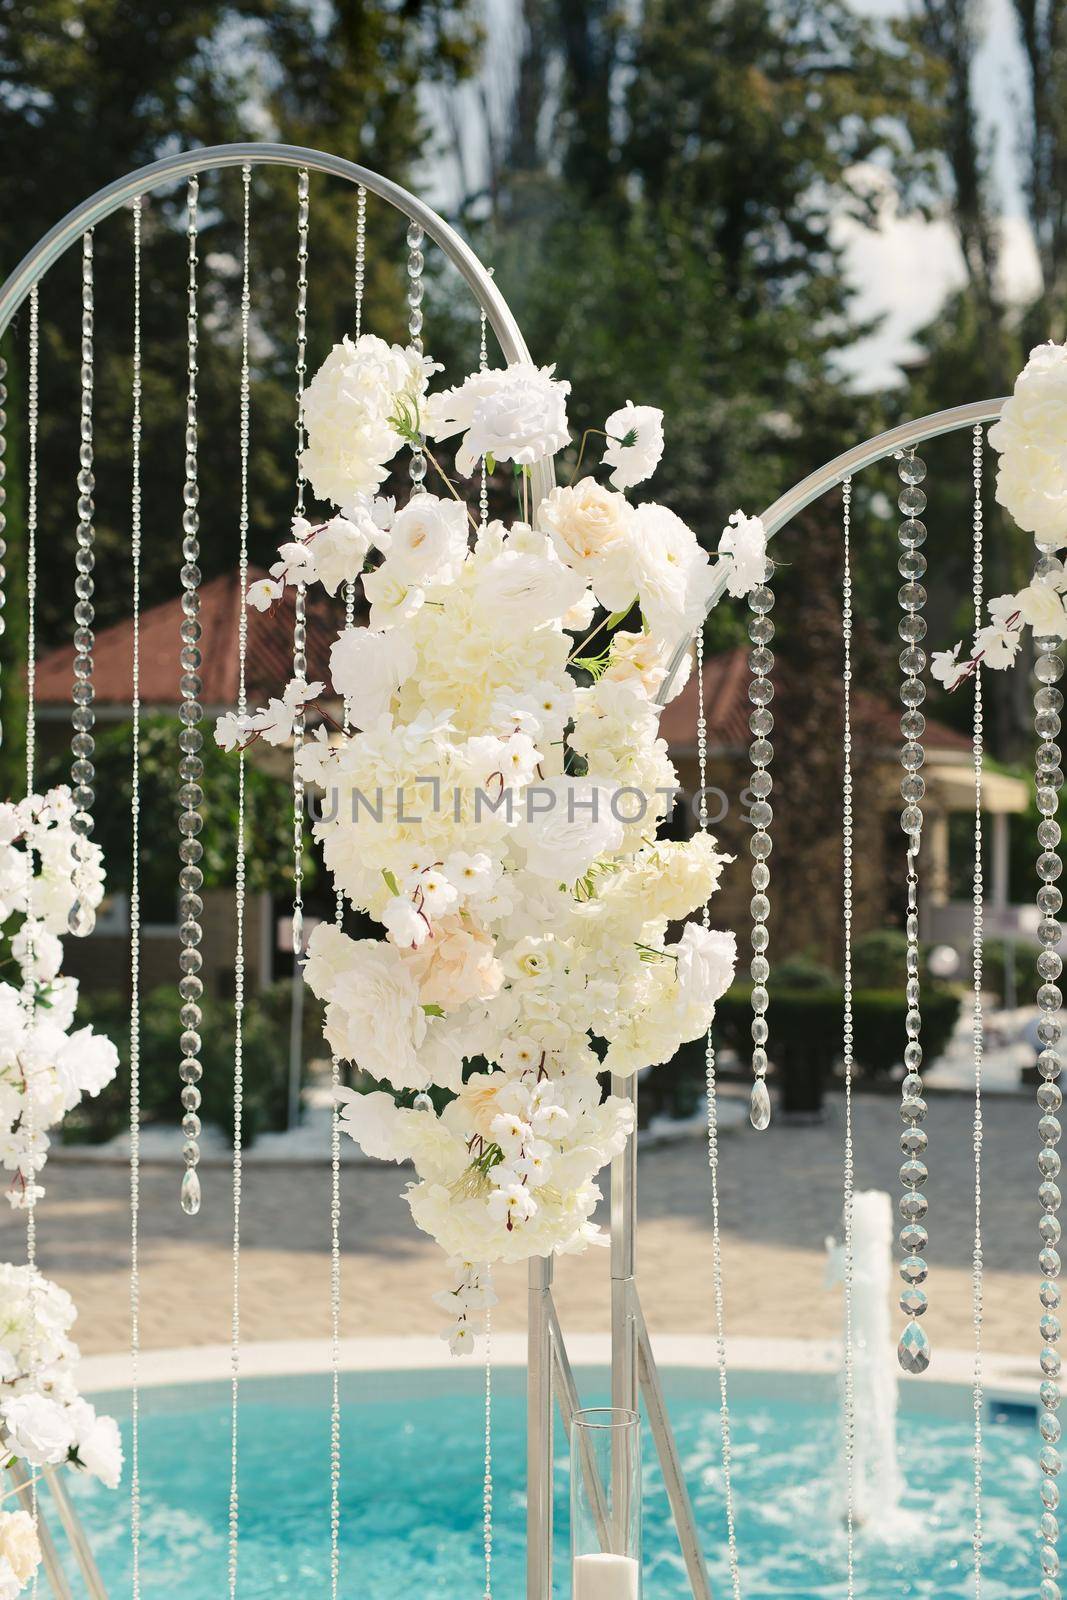 Details of the wedding ceremony made of fresh flowers, sparkling beads. Delicate and beautiful wedding decor for newlyweds.